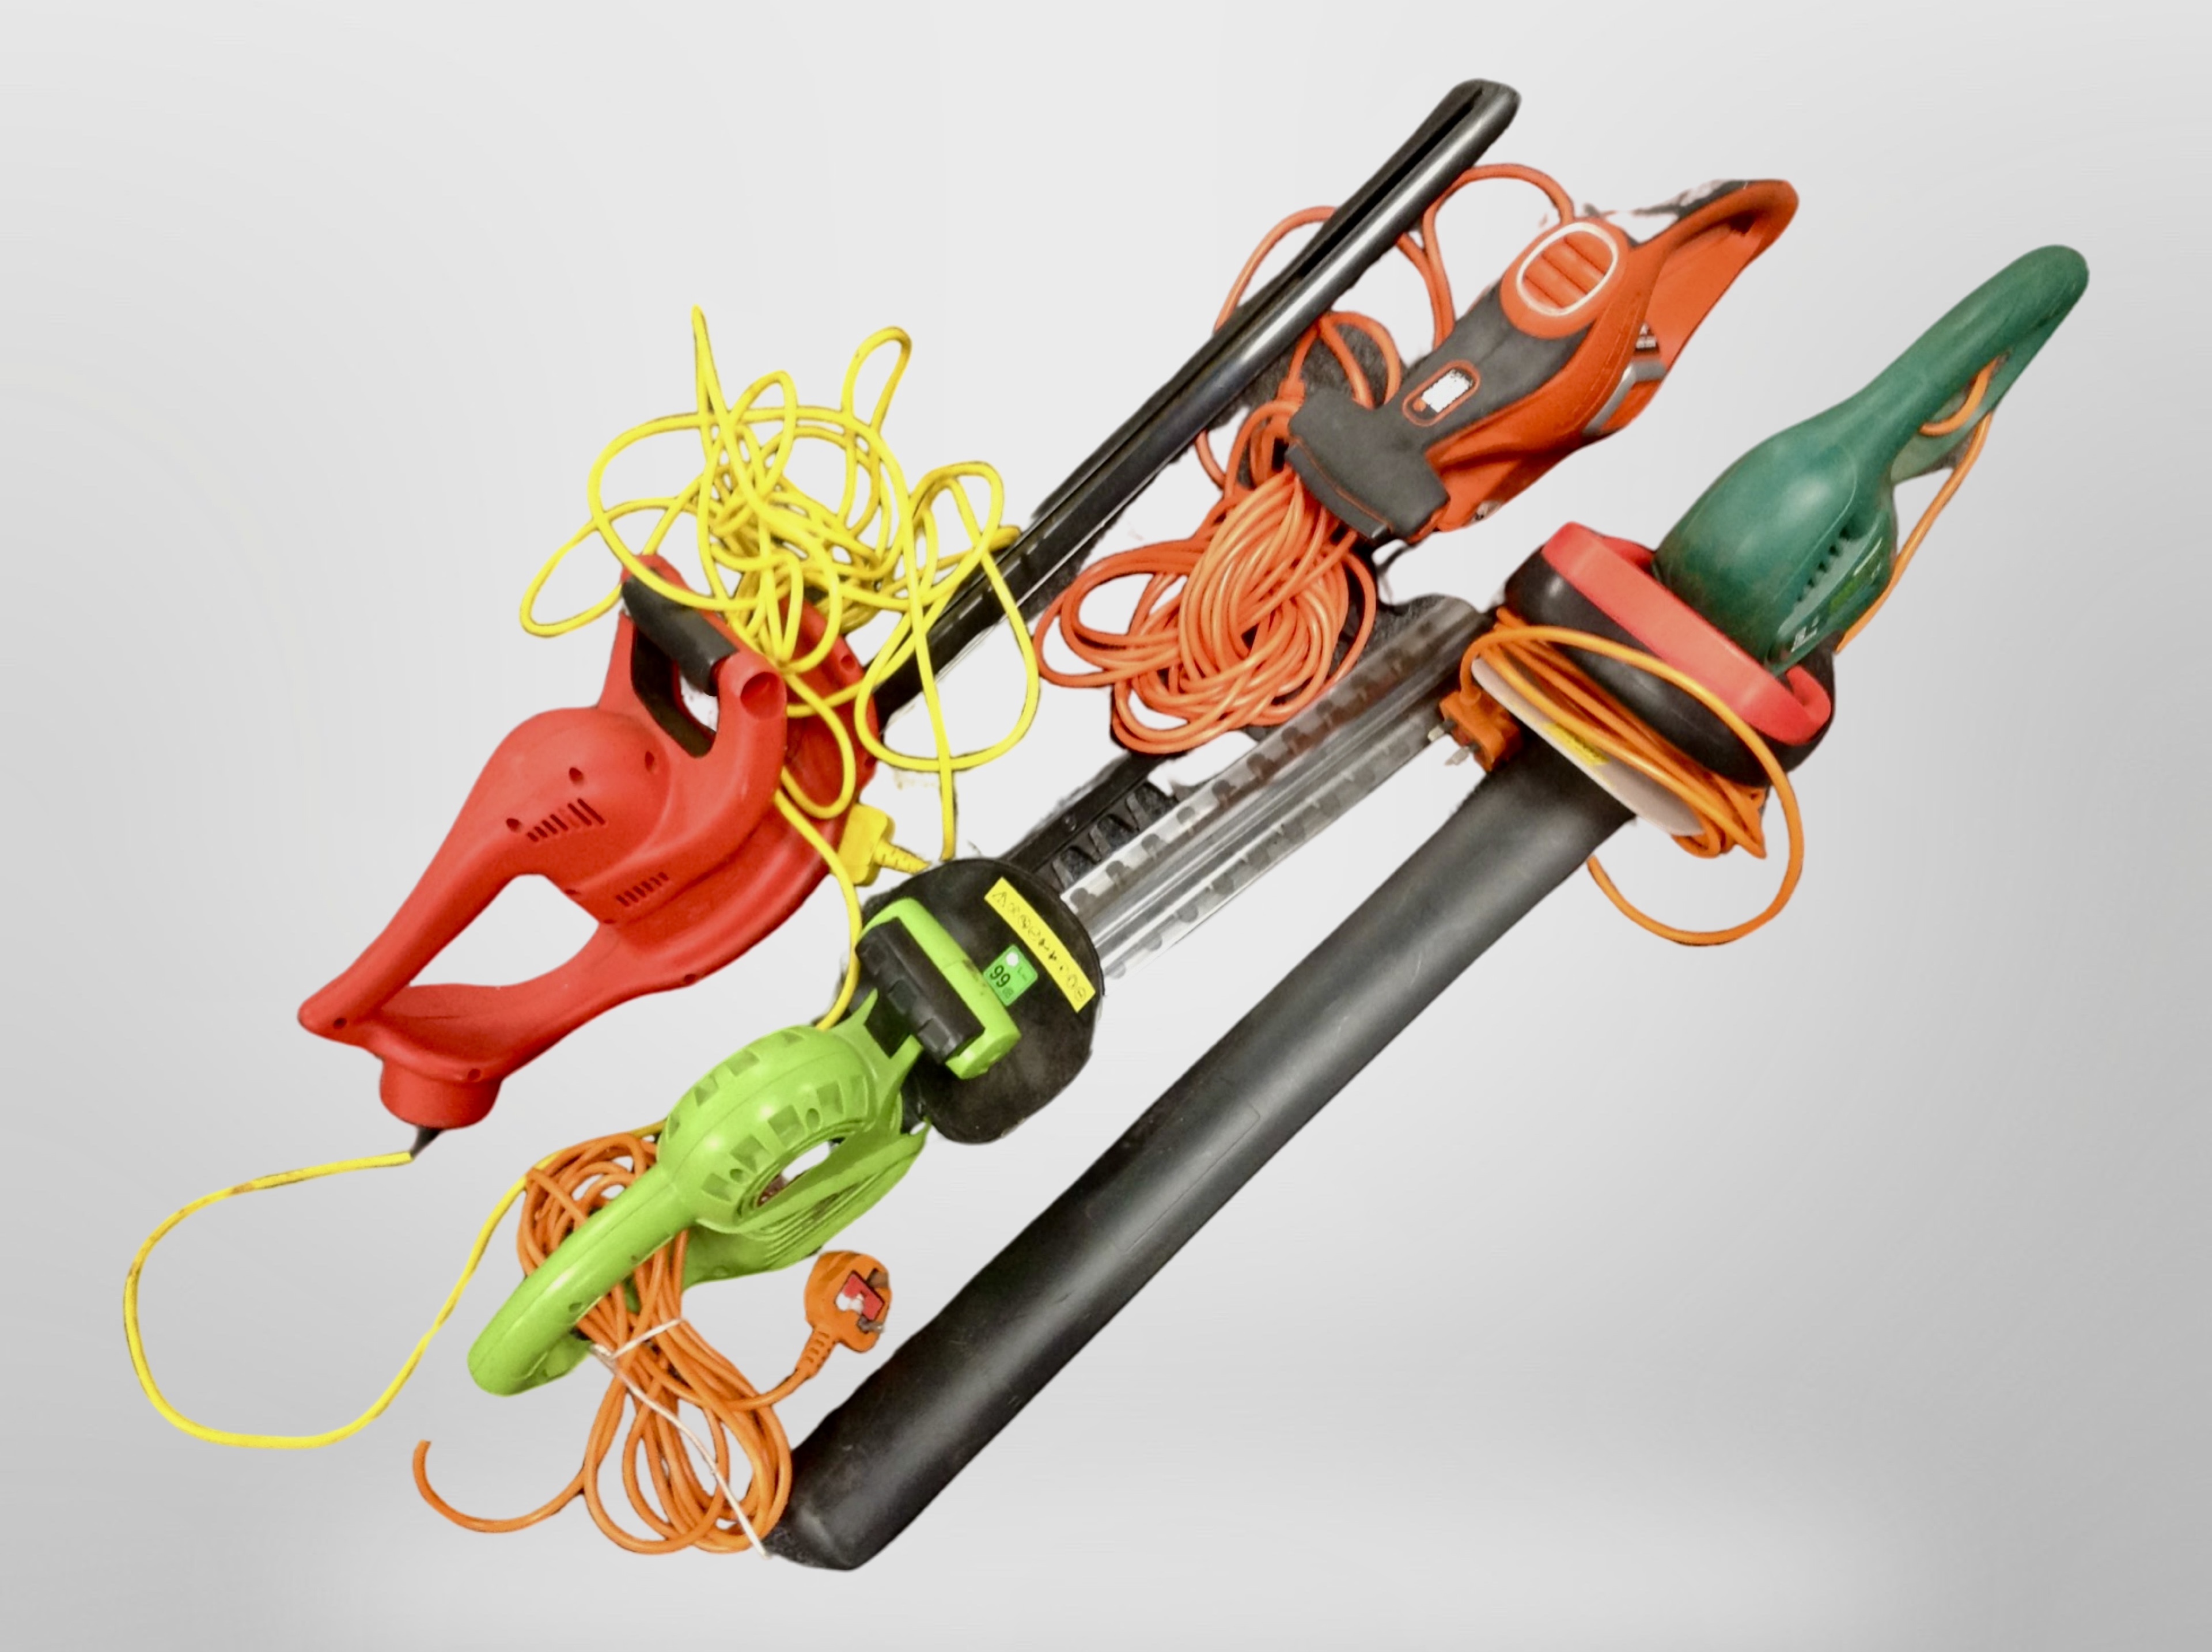 A group of electric hedge trimmers including Black and Decker.